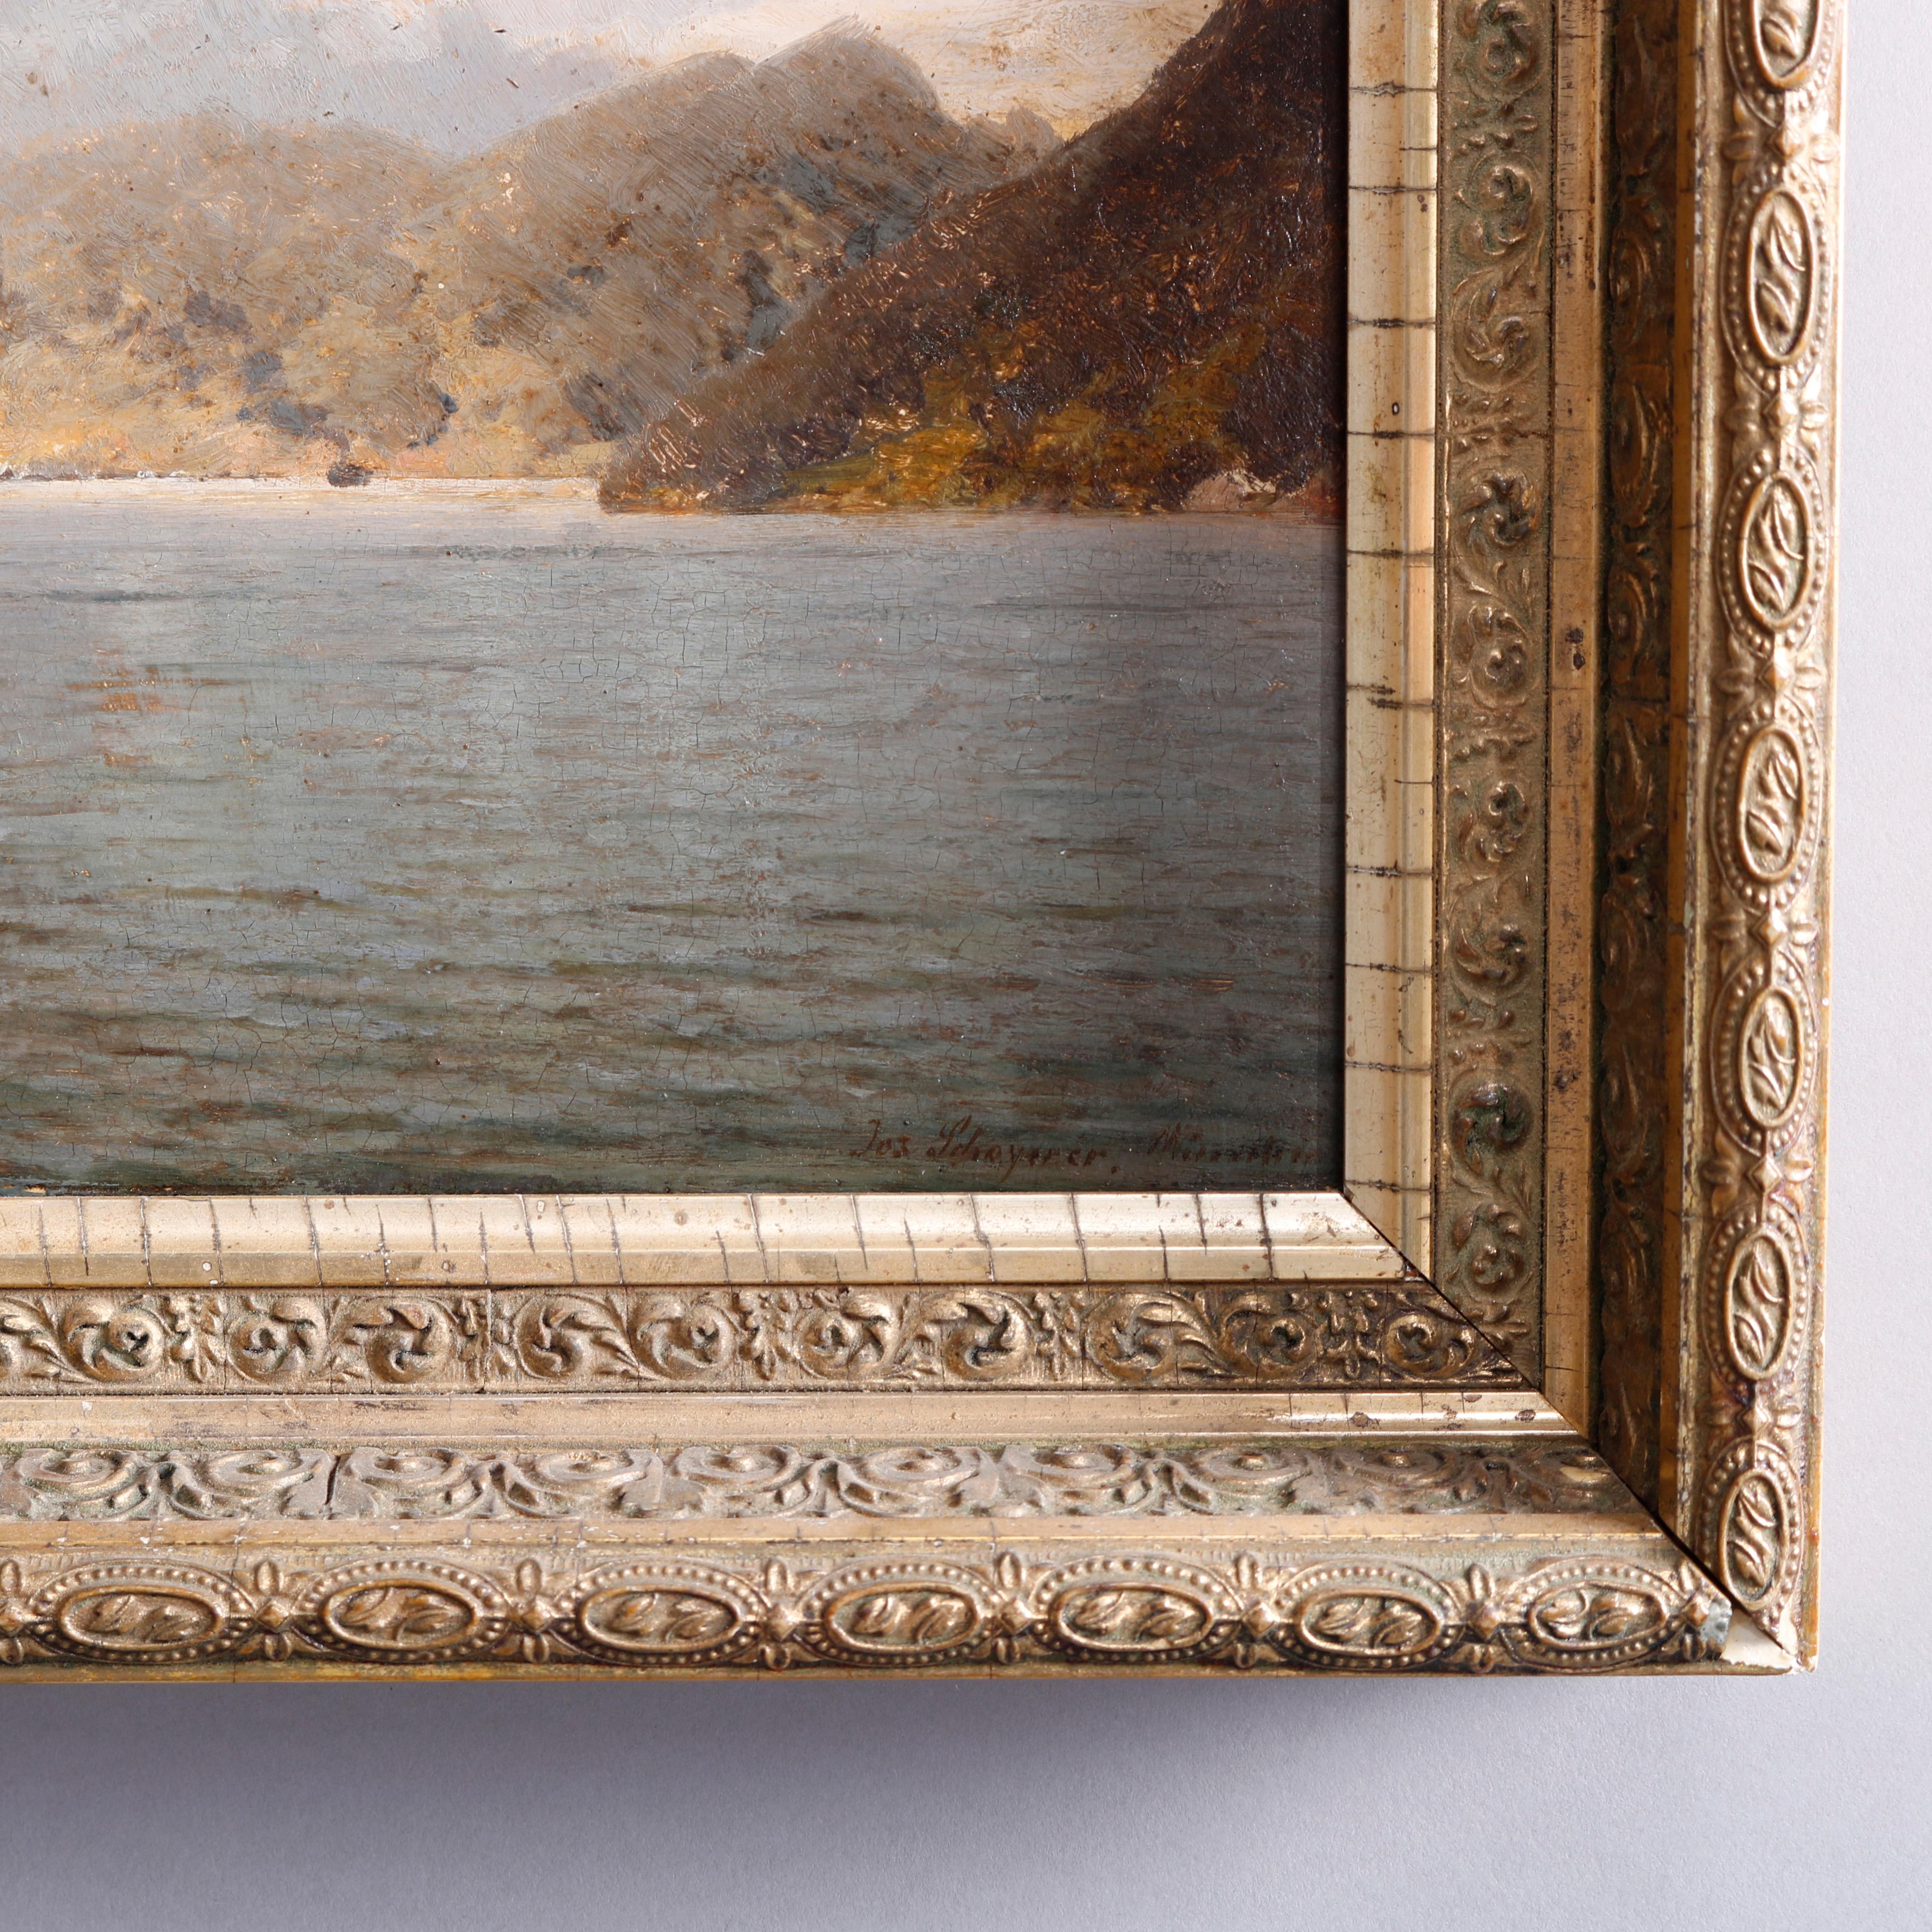 Antique Landscape Painting of Lake by Josef Schoyerer, 19th C 6